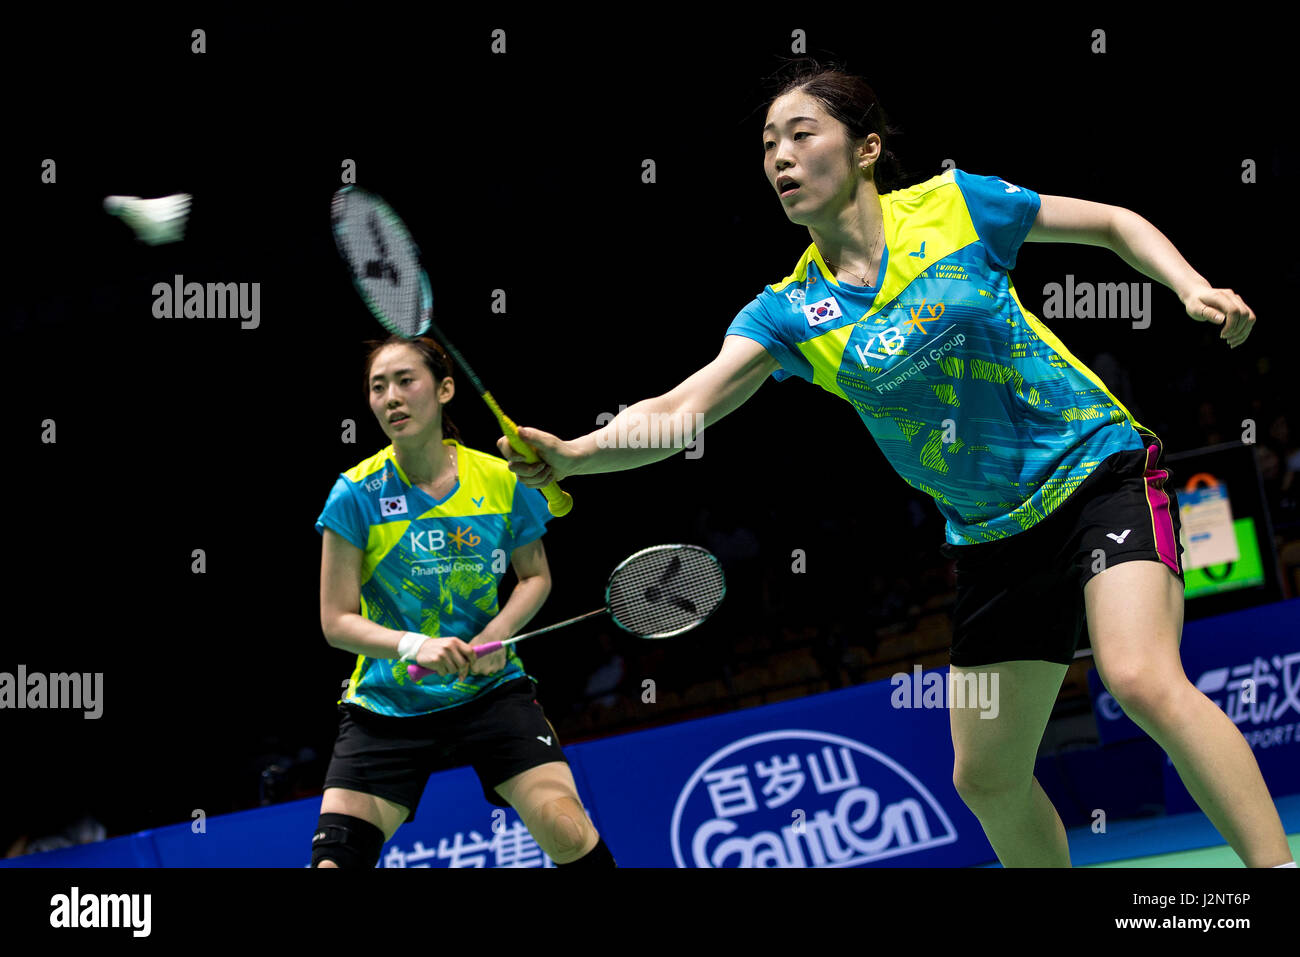 Wuhan, China's Hubei Province. 30th Apr, 2017. Kim Hye Rin and Yoo Hae Won  (L) of South Korea compete during the women's doubles final match against  Matsutomo Misaki and Takahashi Ayaka of